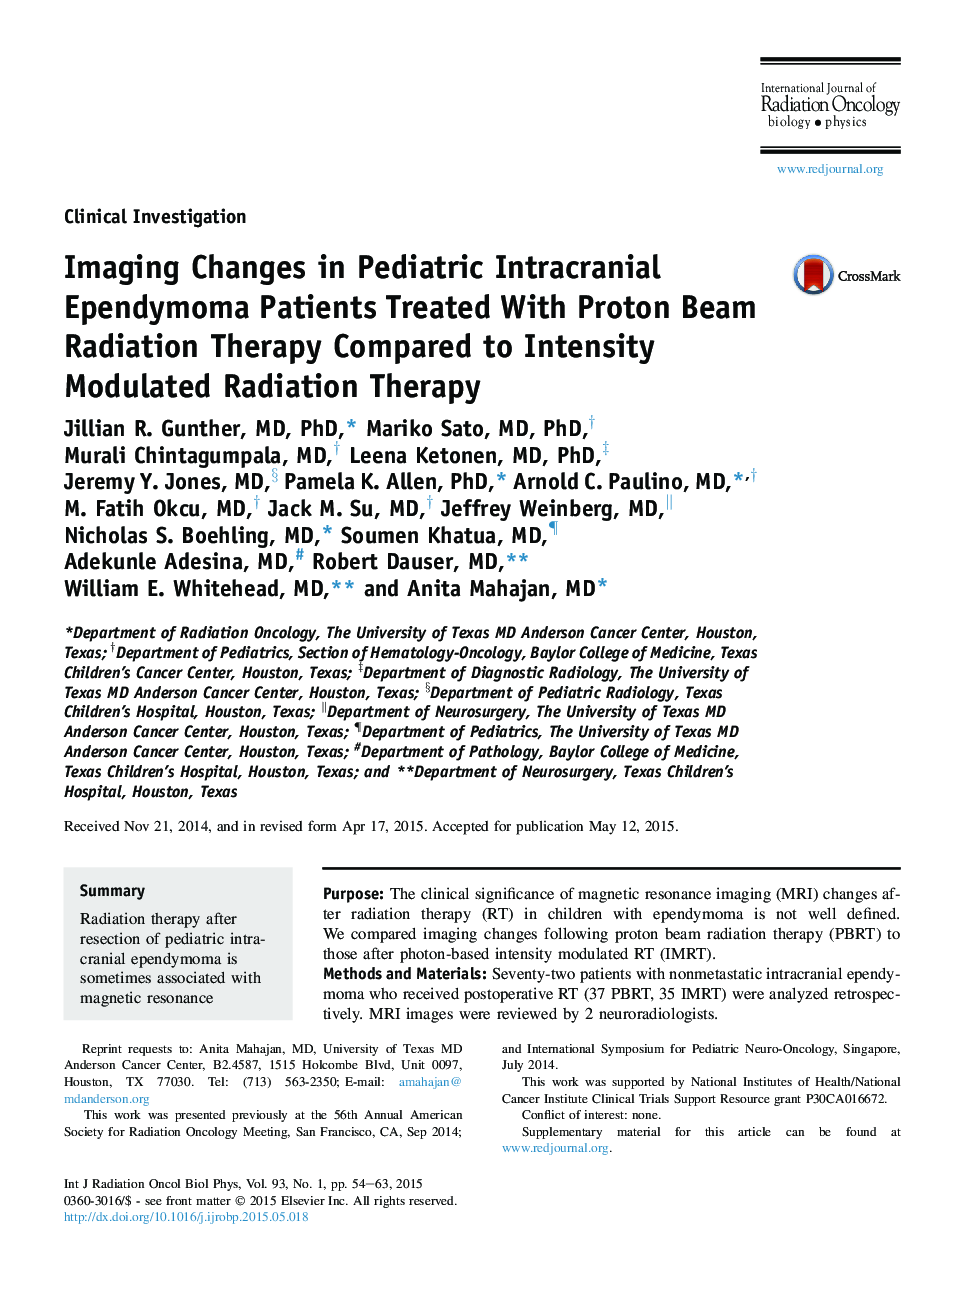 Imaging Changes in Pediatric Intracranial Ependymoma Patients Treated With Proton Beam Radiation Therapy Compared to Intensity Modulated Radiation Therapy